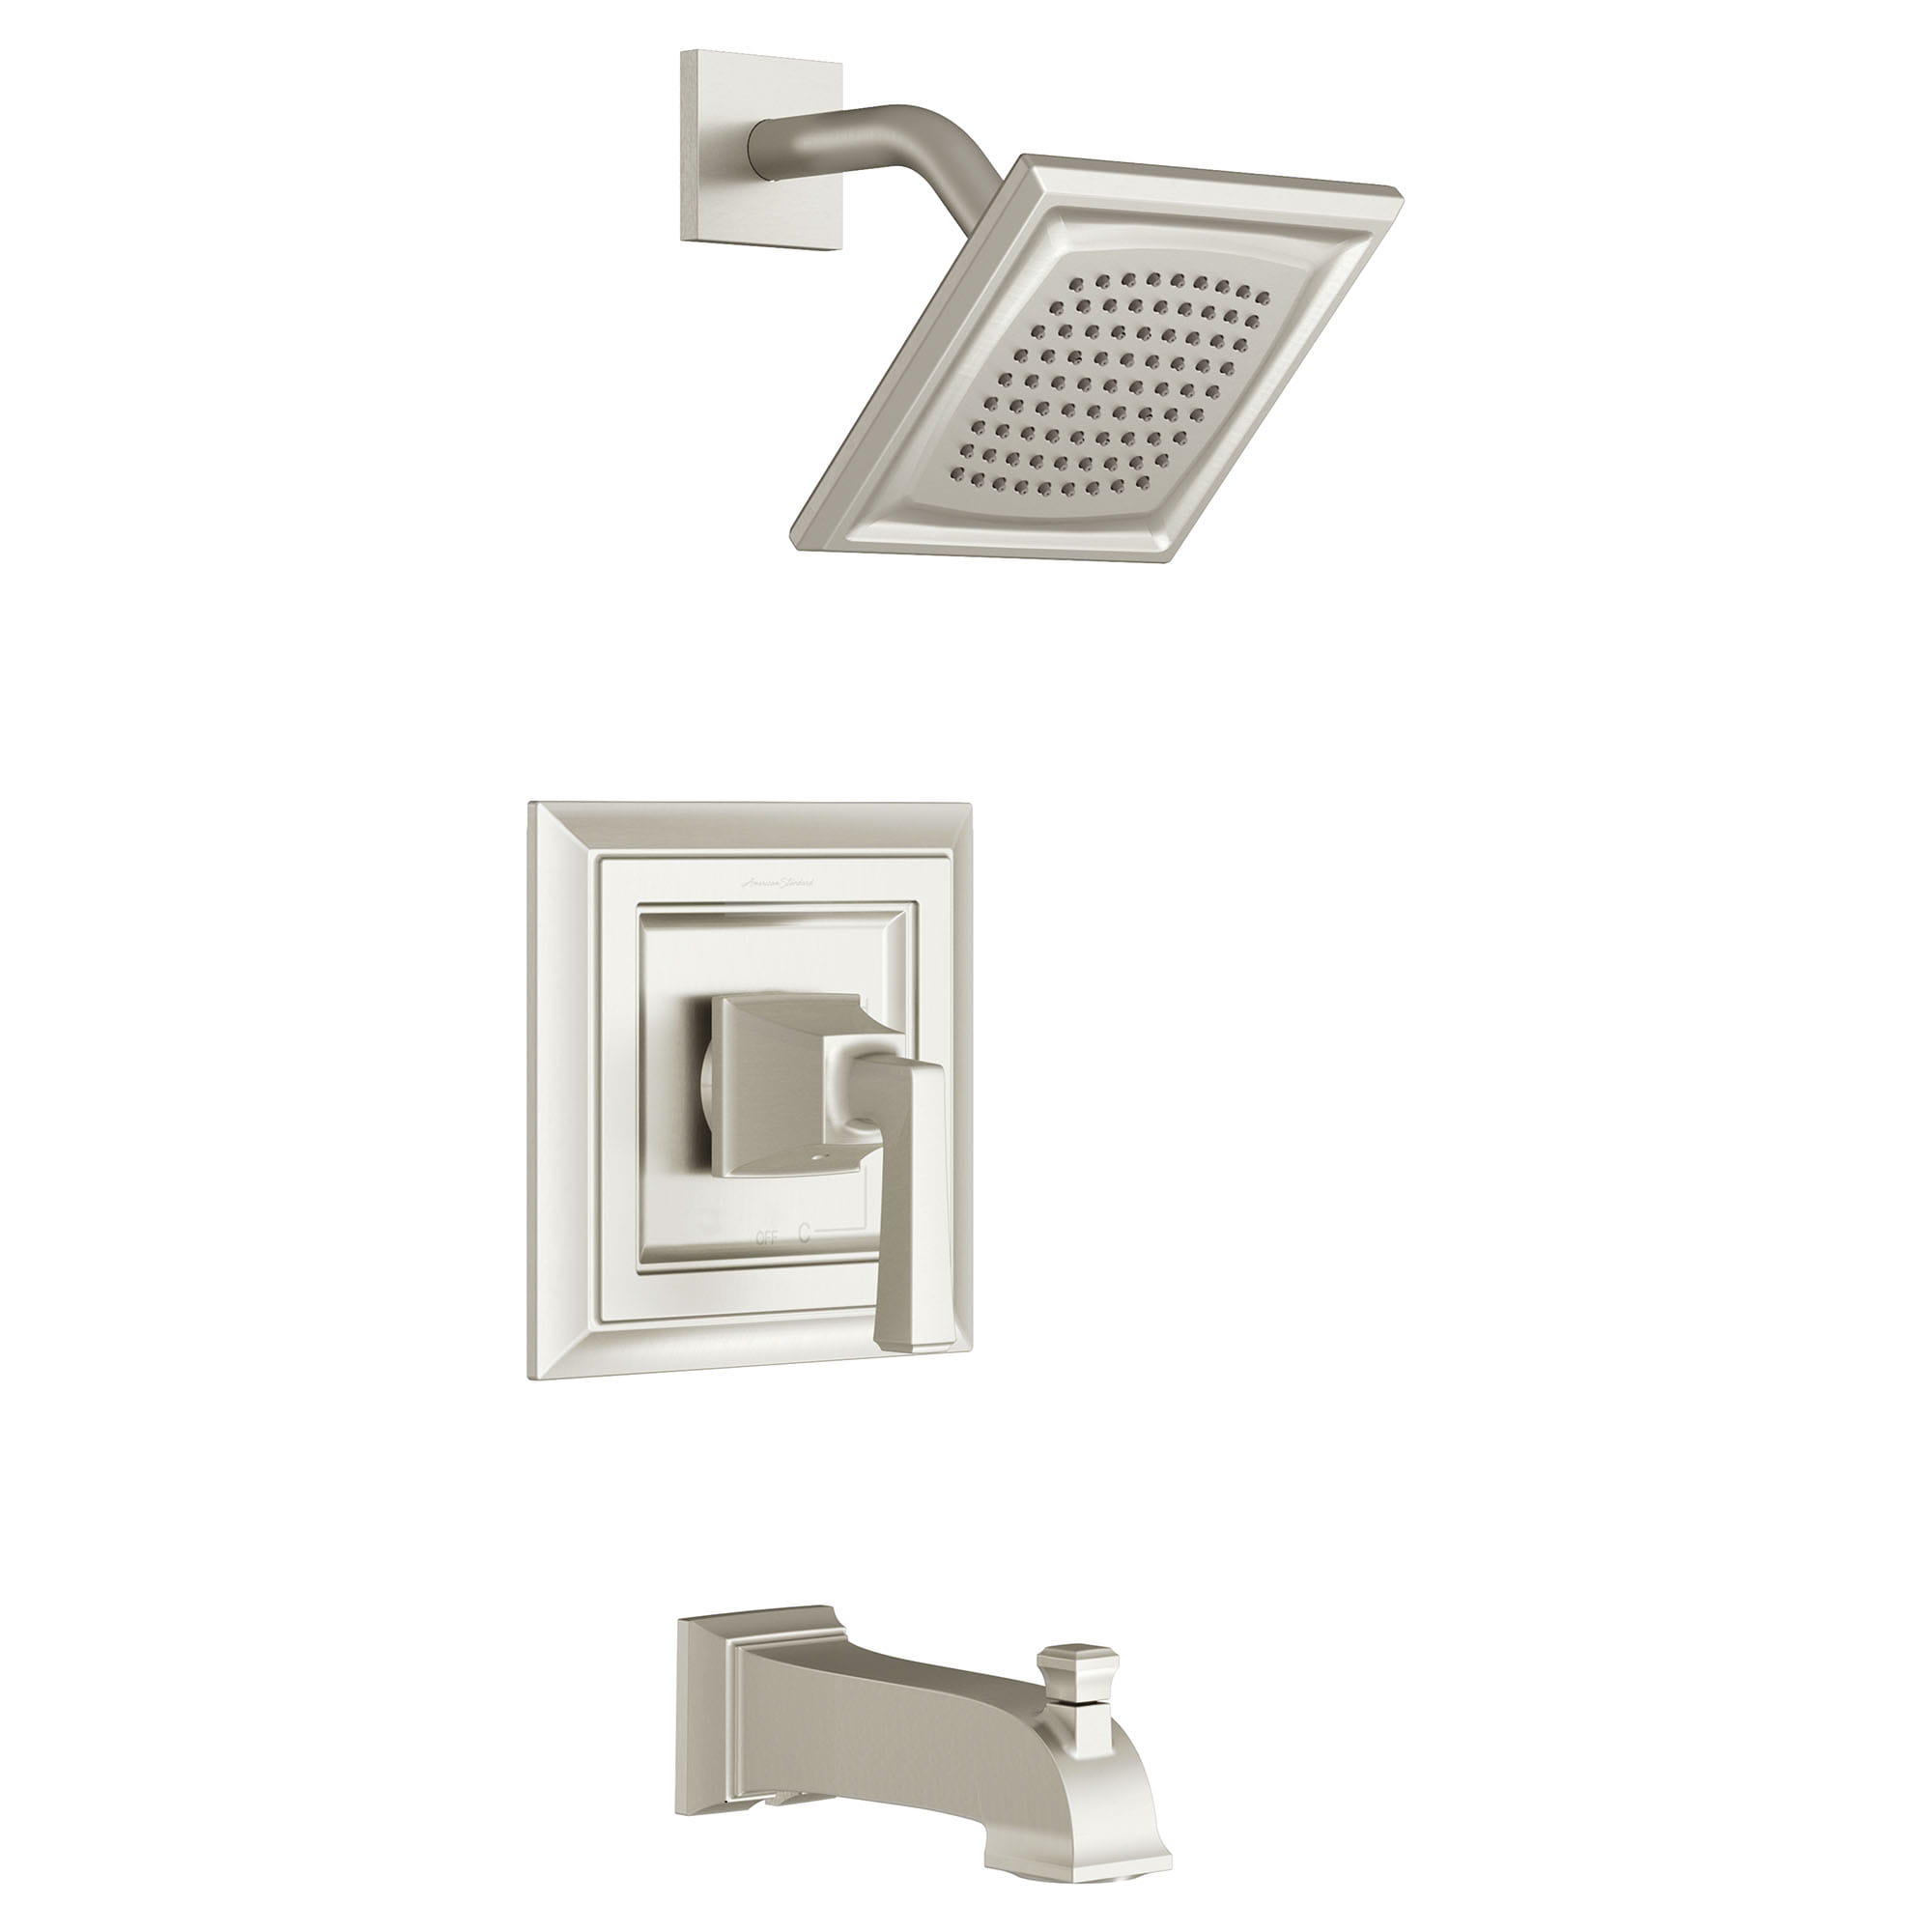 Town Square S 1.8 GPM Tub and Shower Trim Kit with Lever Handle